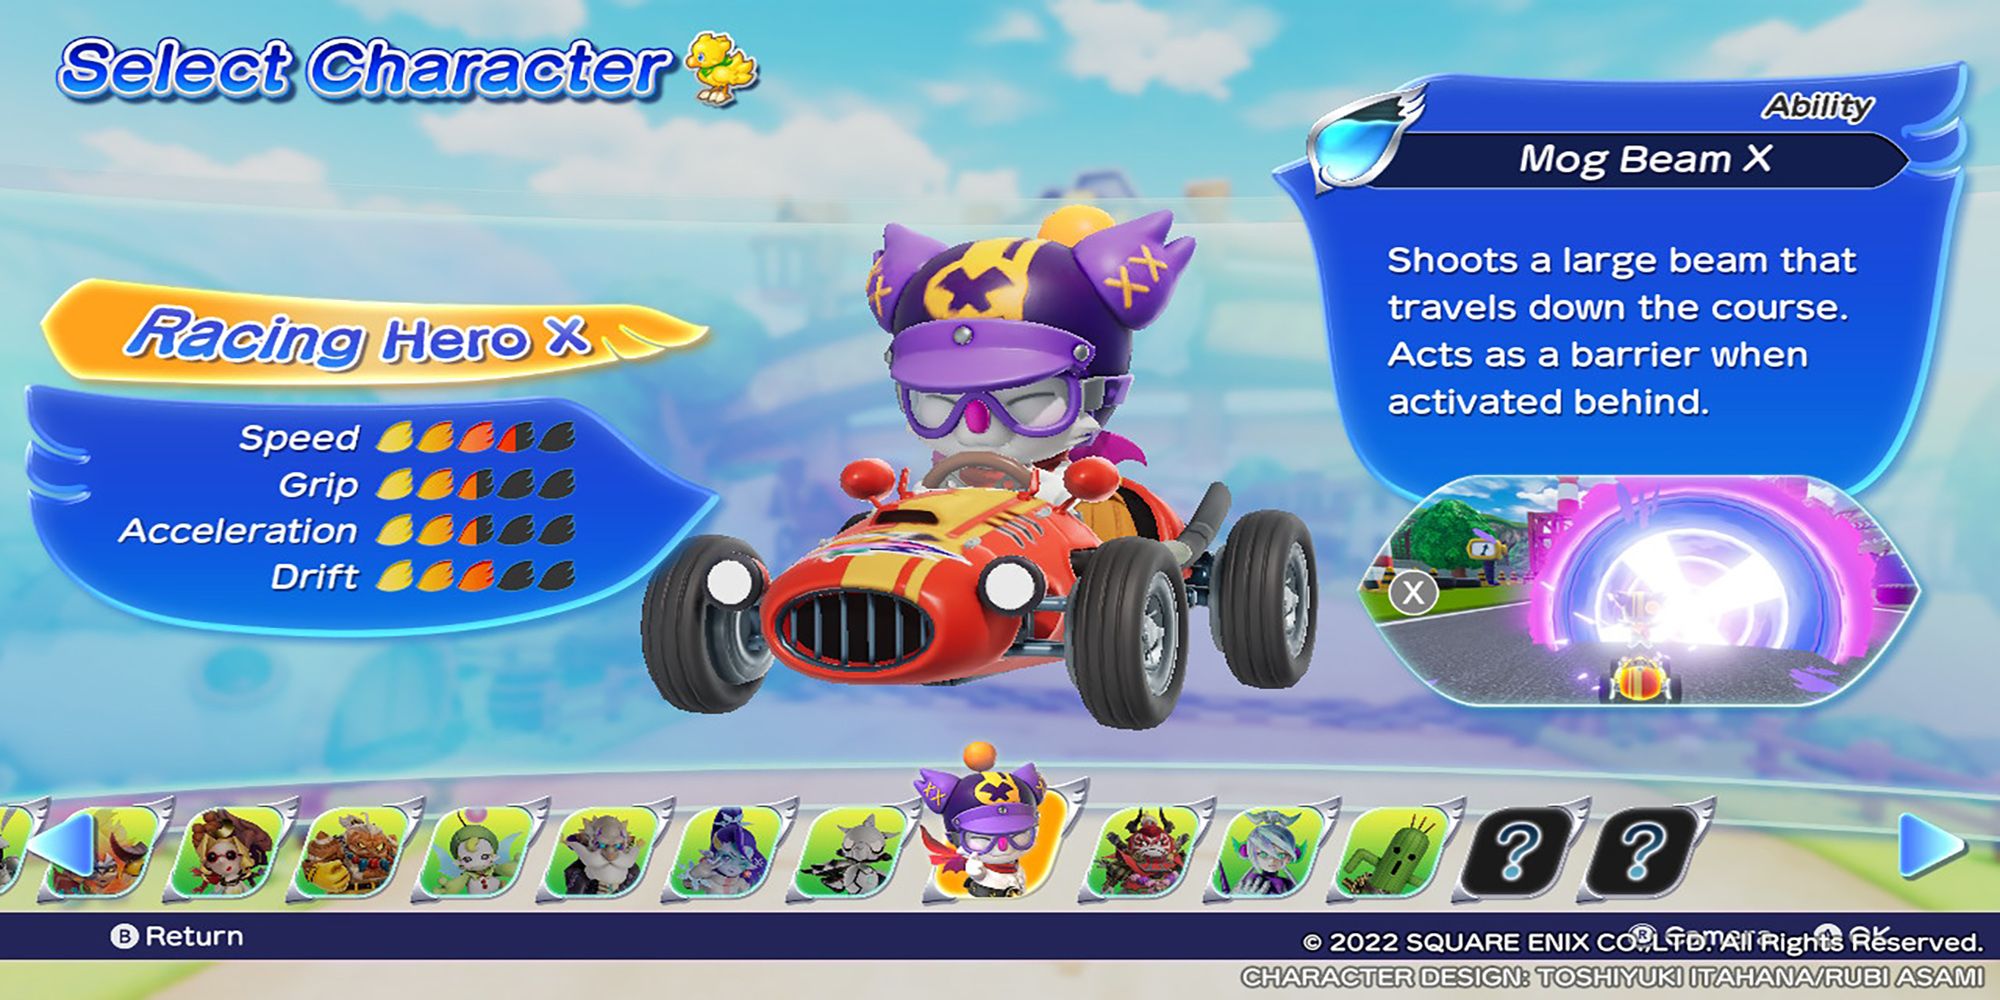 Racing Hero X's character model, along with his stats and abilities, in the Select Character menu. Chocobo GP.